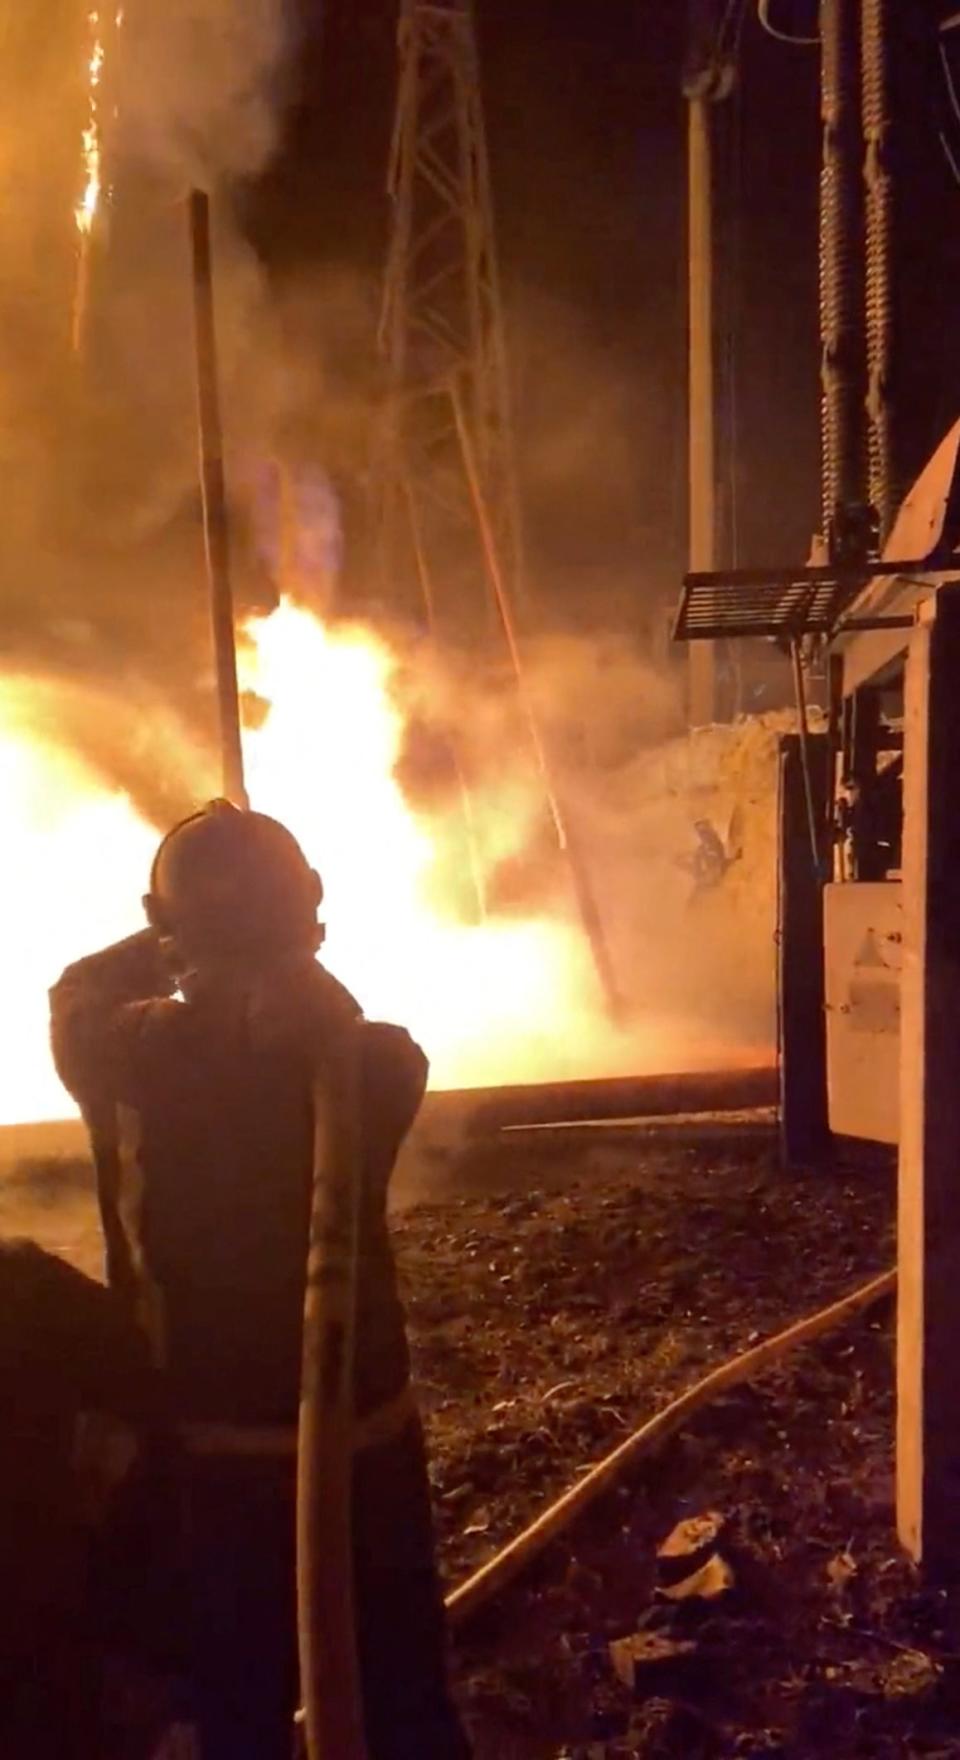 <div class="inline-image__title">UKRAINE-CRISIS/FIRE</div> <div class="inline-image__caption"><p>Firefighters work to contain a fire that broke out after a Russian strike at an electricity station, in Kharkiv, Ukraine, in this screen grab from a video released on December 29, 2022. </p></div> <div class="inline-image__credit">Twitter/@FireFighterUA via Reuters</div>